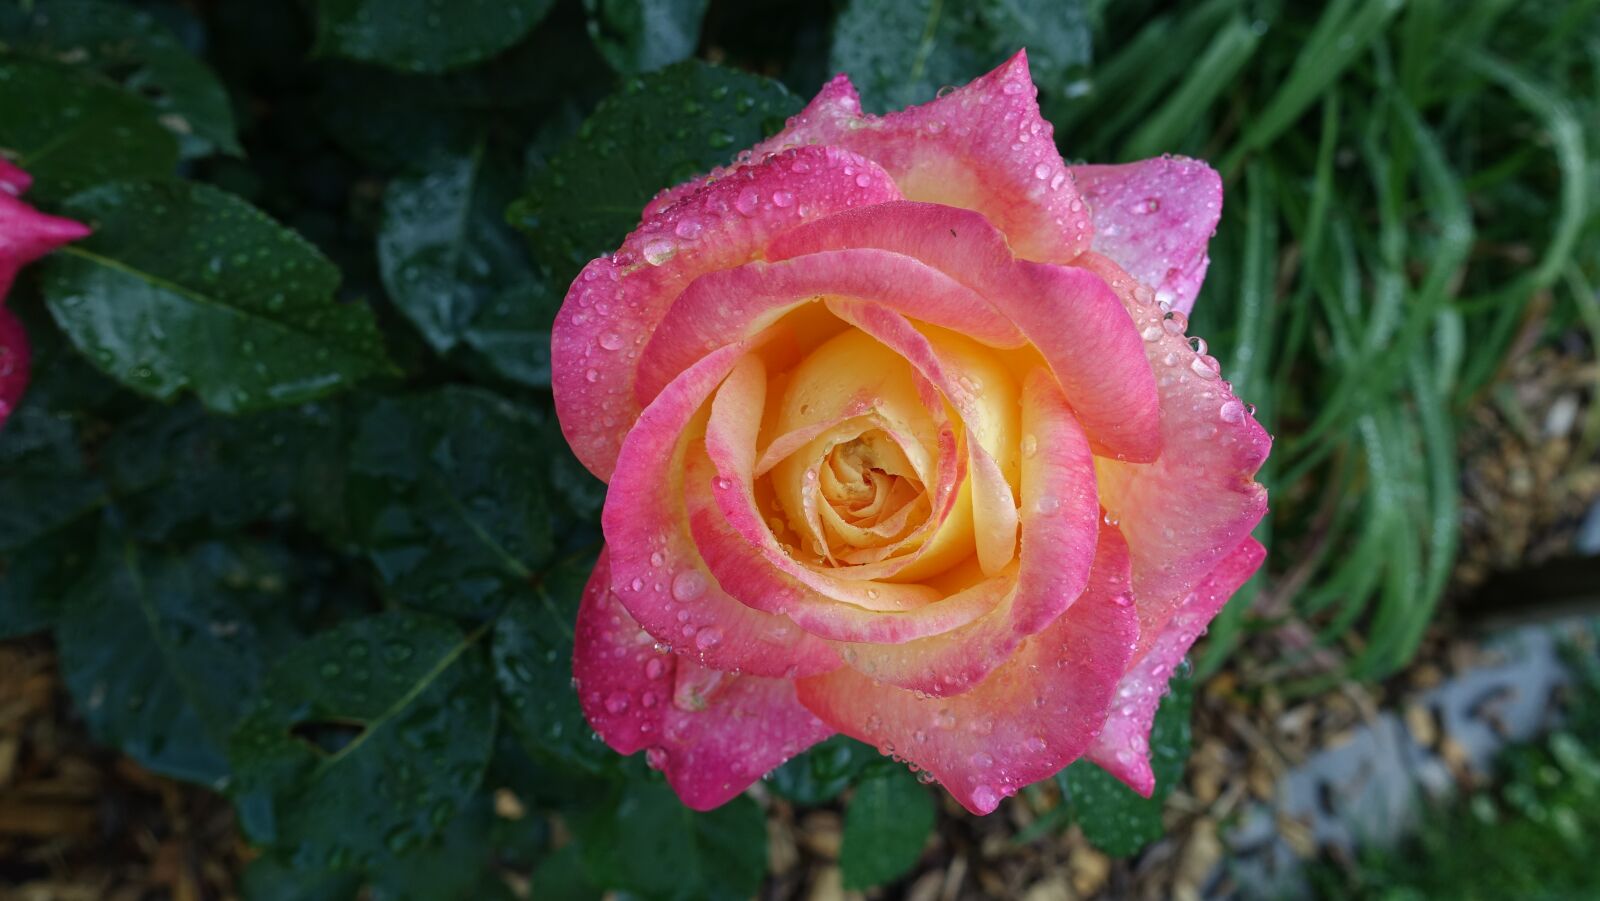 Sony Cyber-shot DSC-RX100 III sample photo. Rose, dew, nature photography